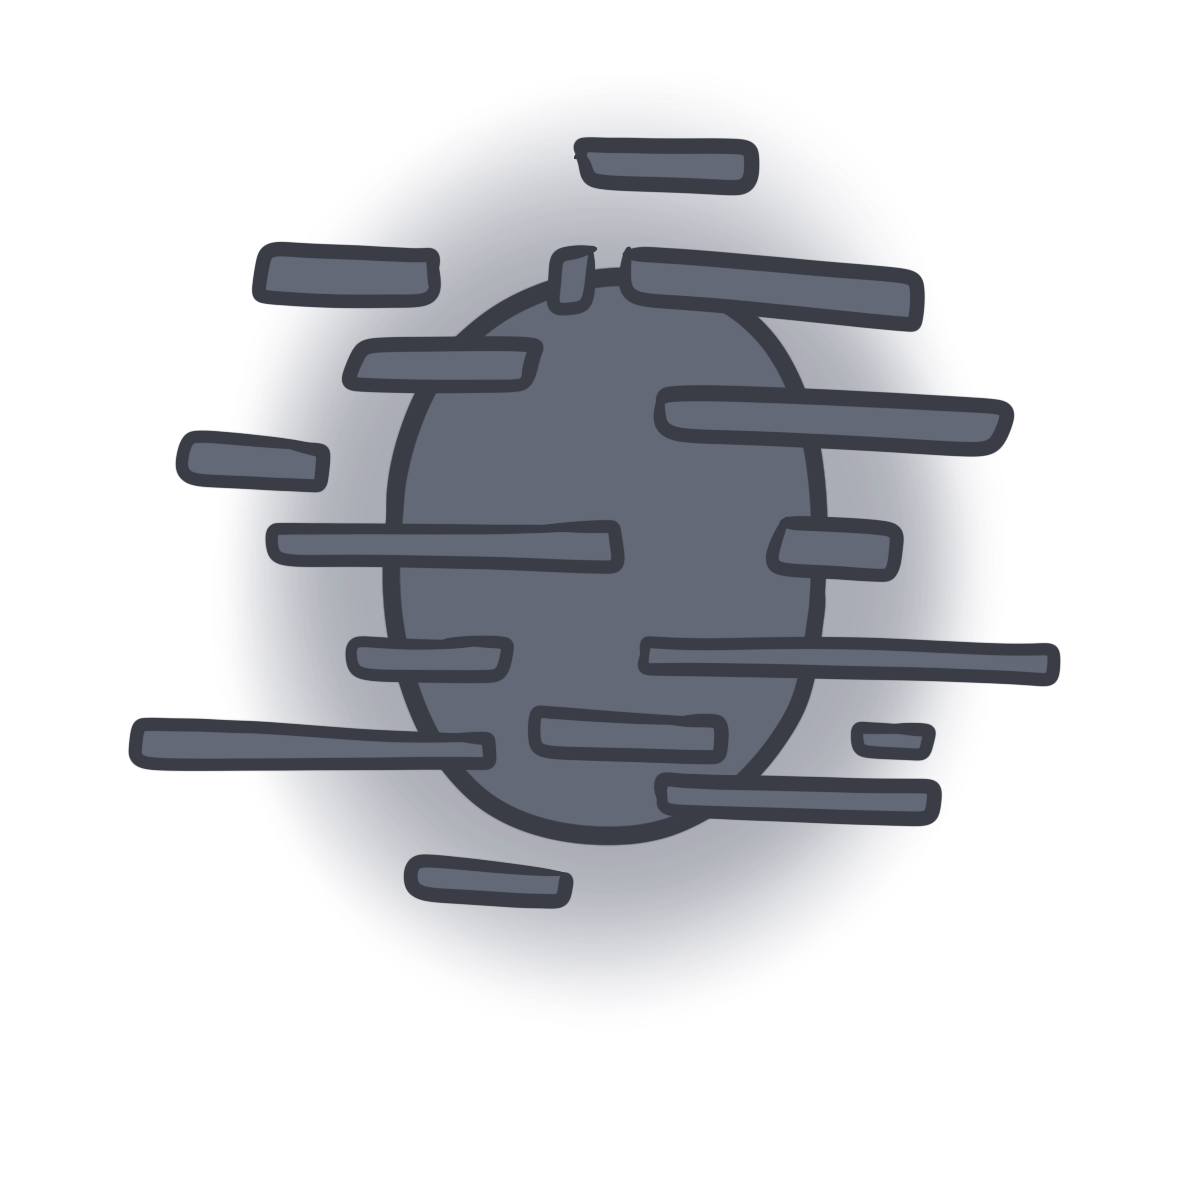 A dark gray glowing oval with horizontal thin rectangles around it.